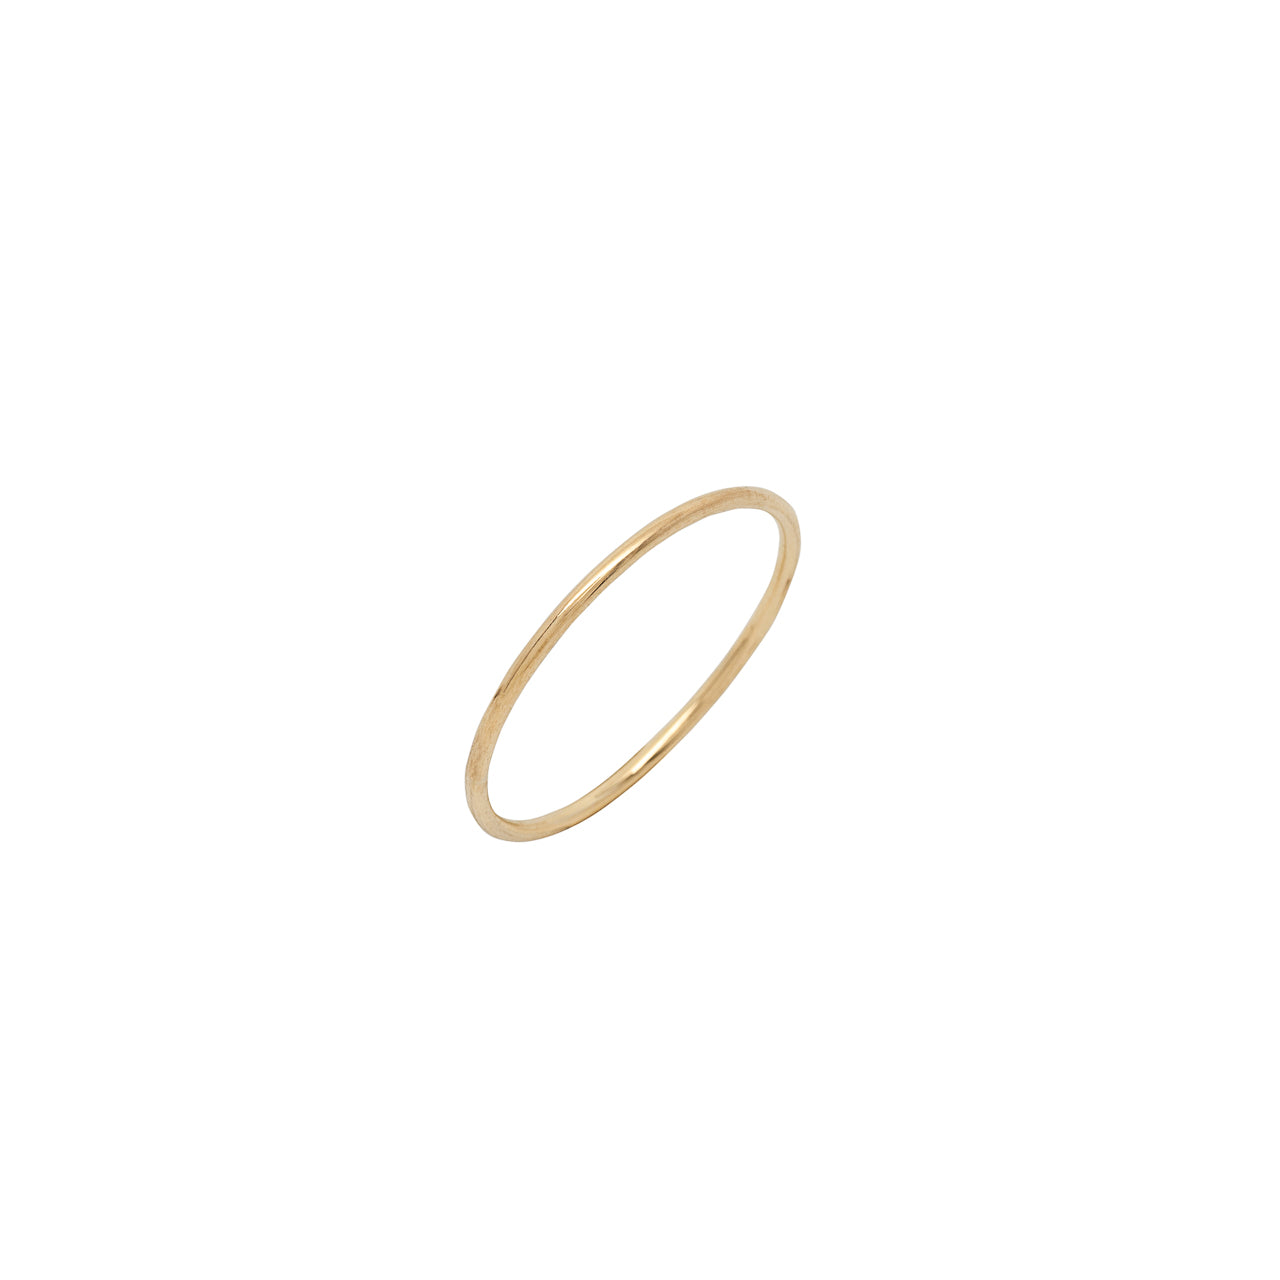 Thin gold stackable band